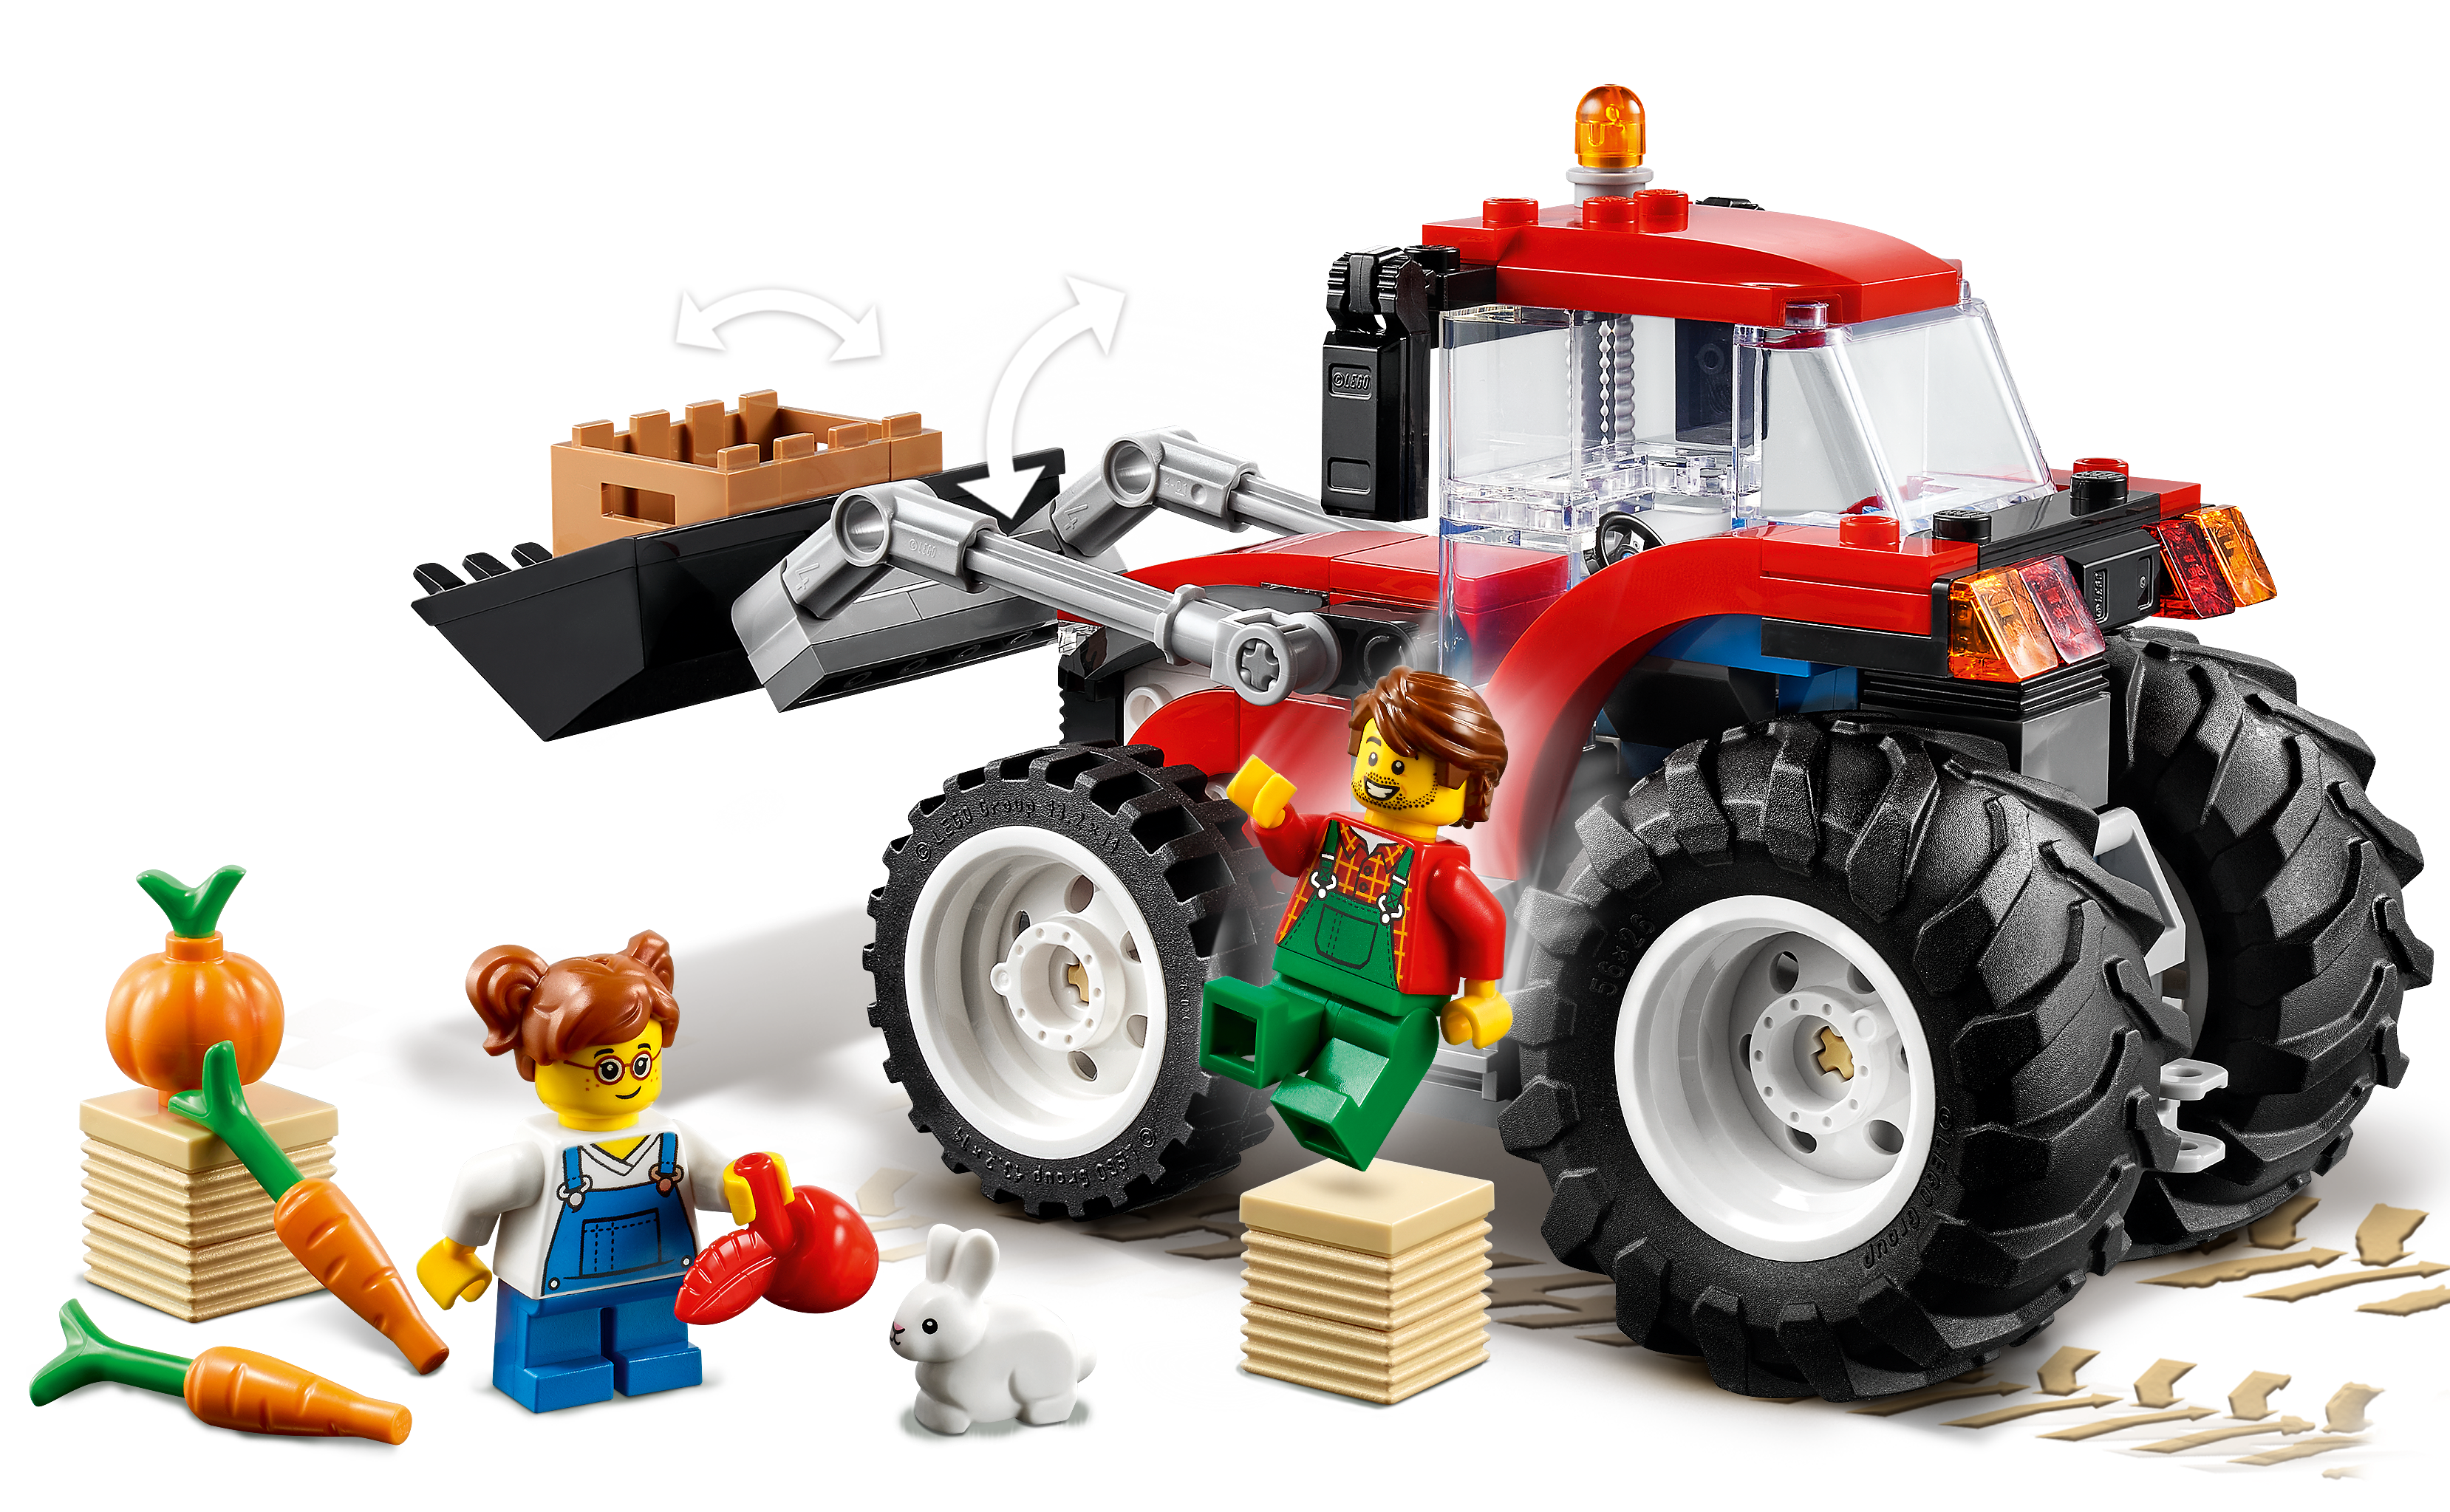 LEGO City 60287 Tractor Building Kit Kids Gift Set New 2021 